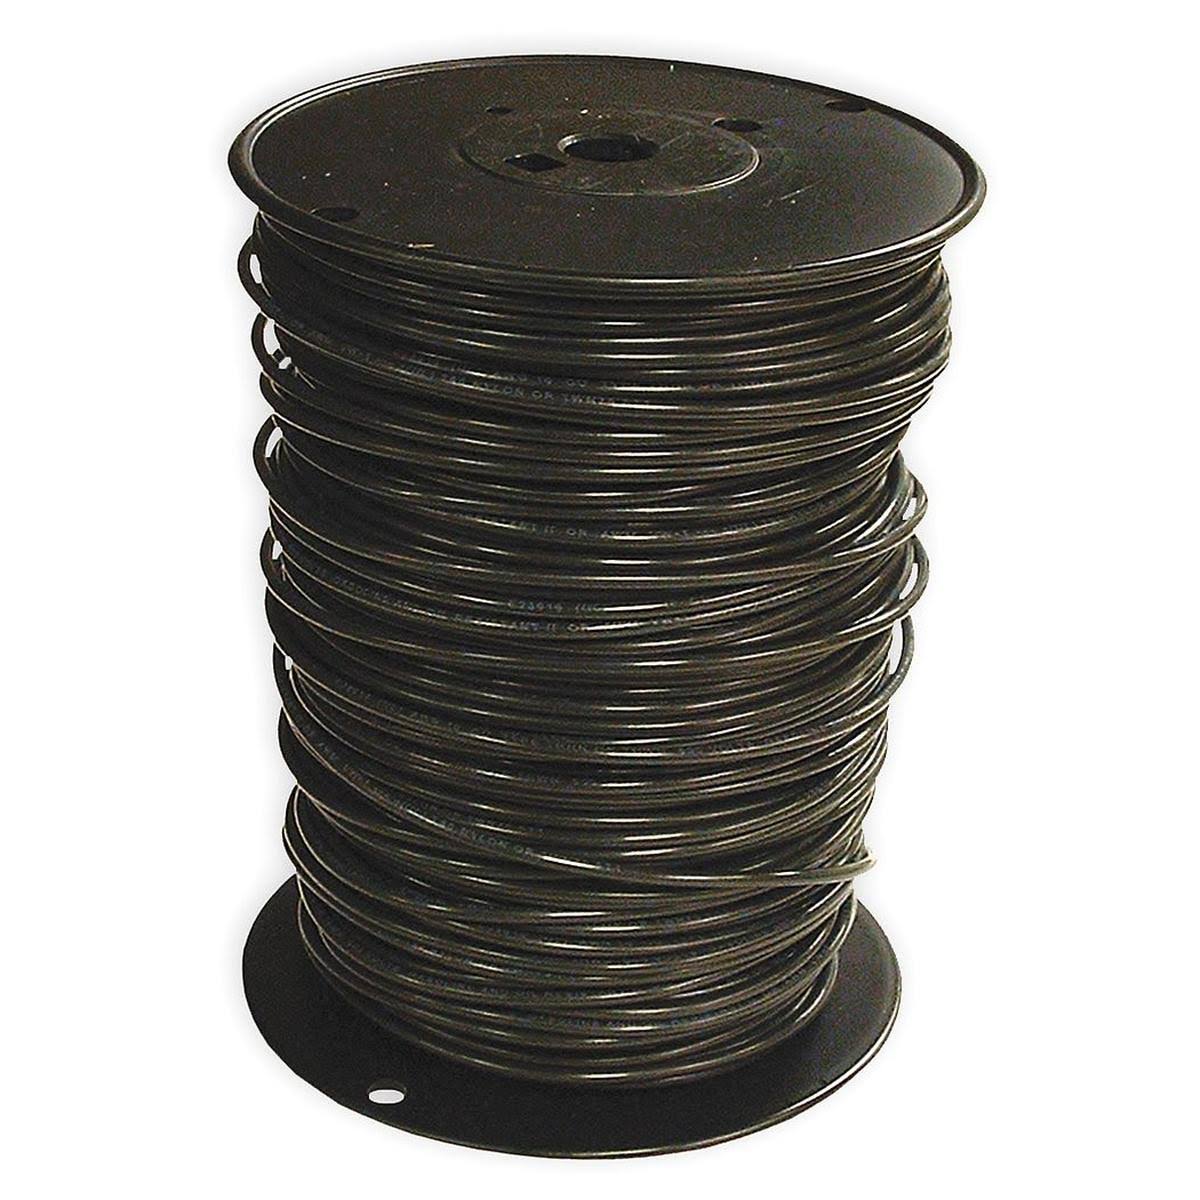 Southwire Company Stranded Single Building Wire - 14 AWG, 500'